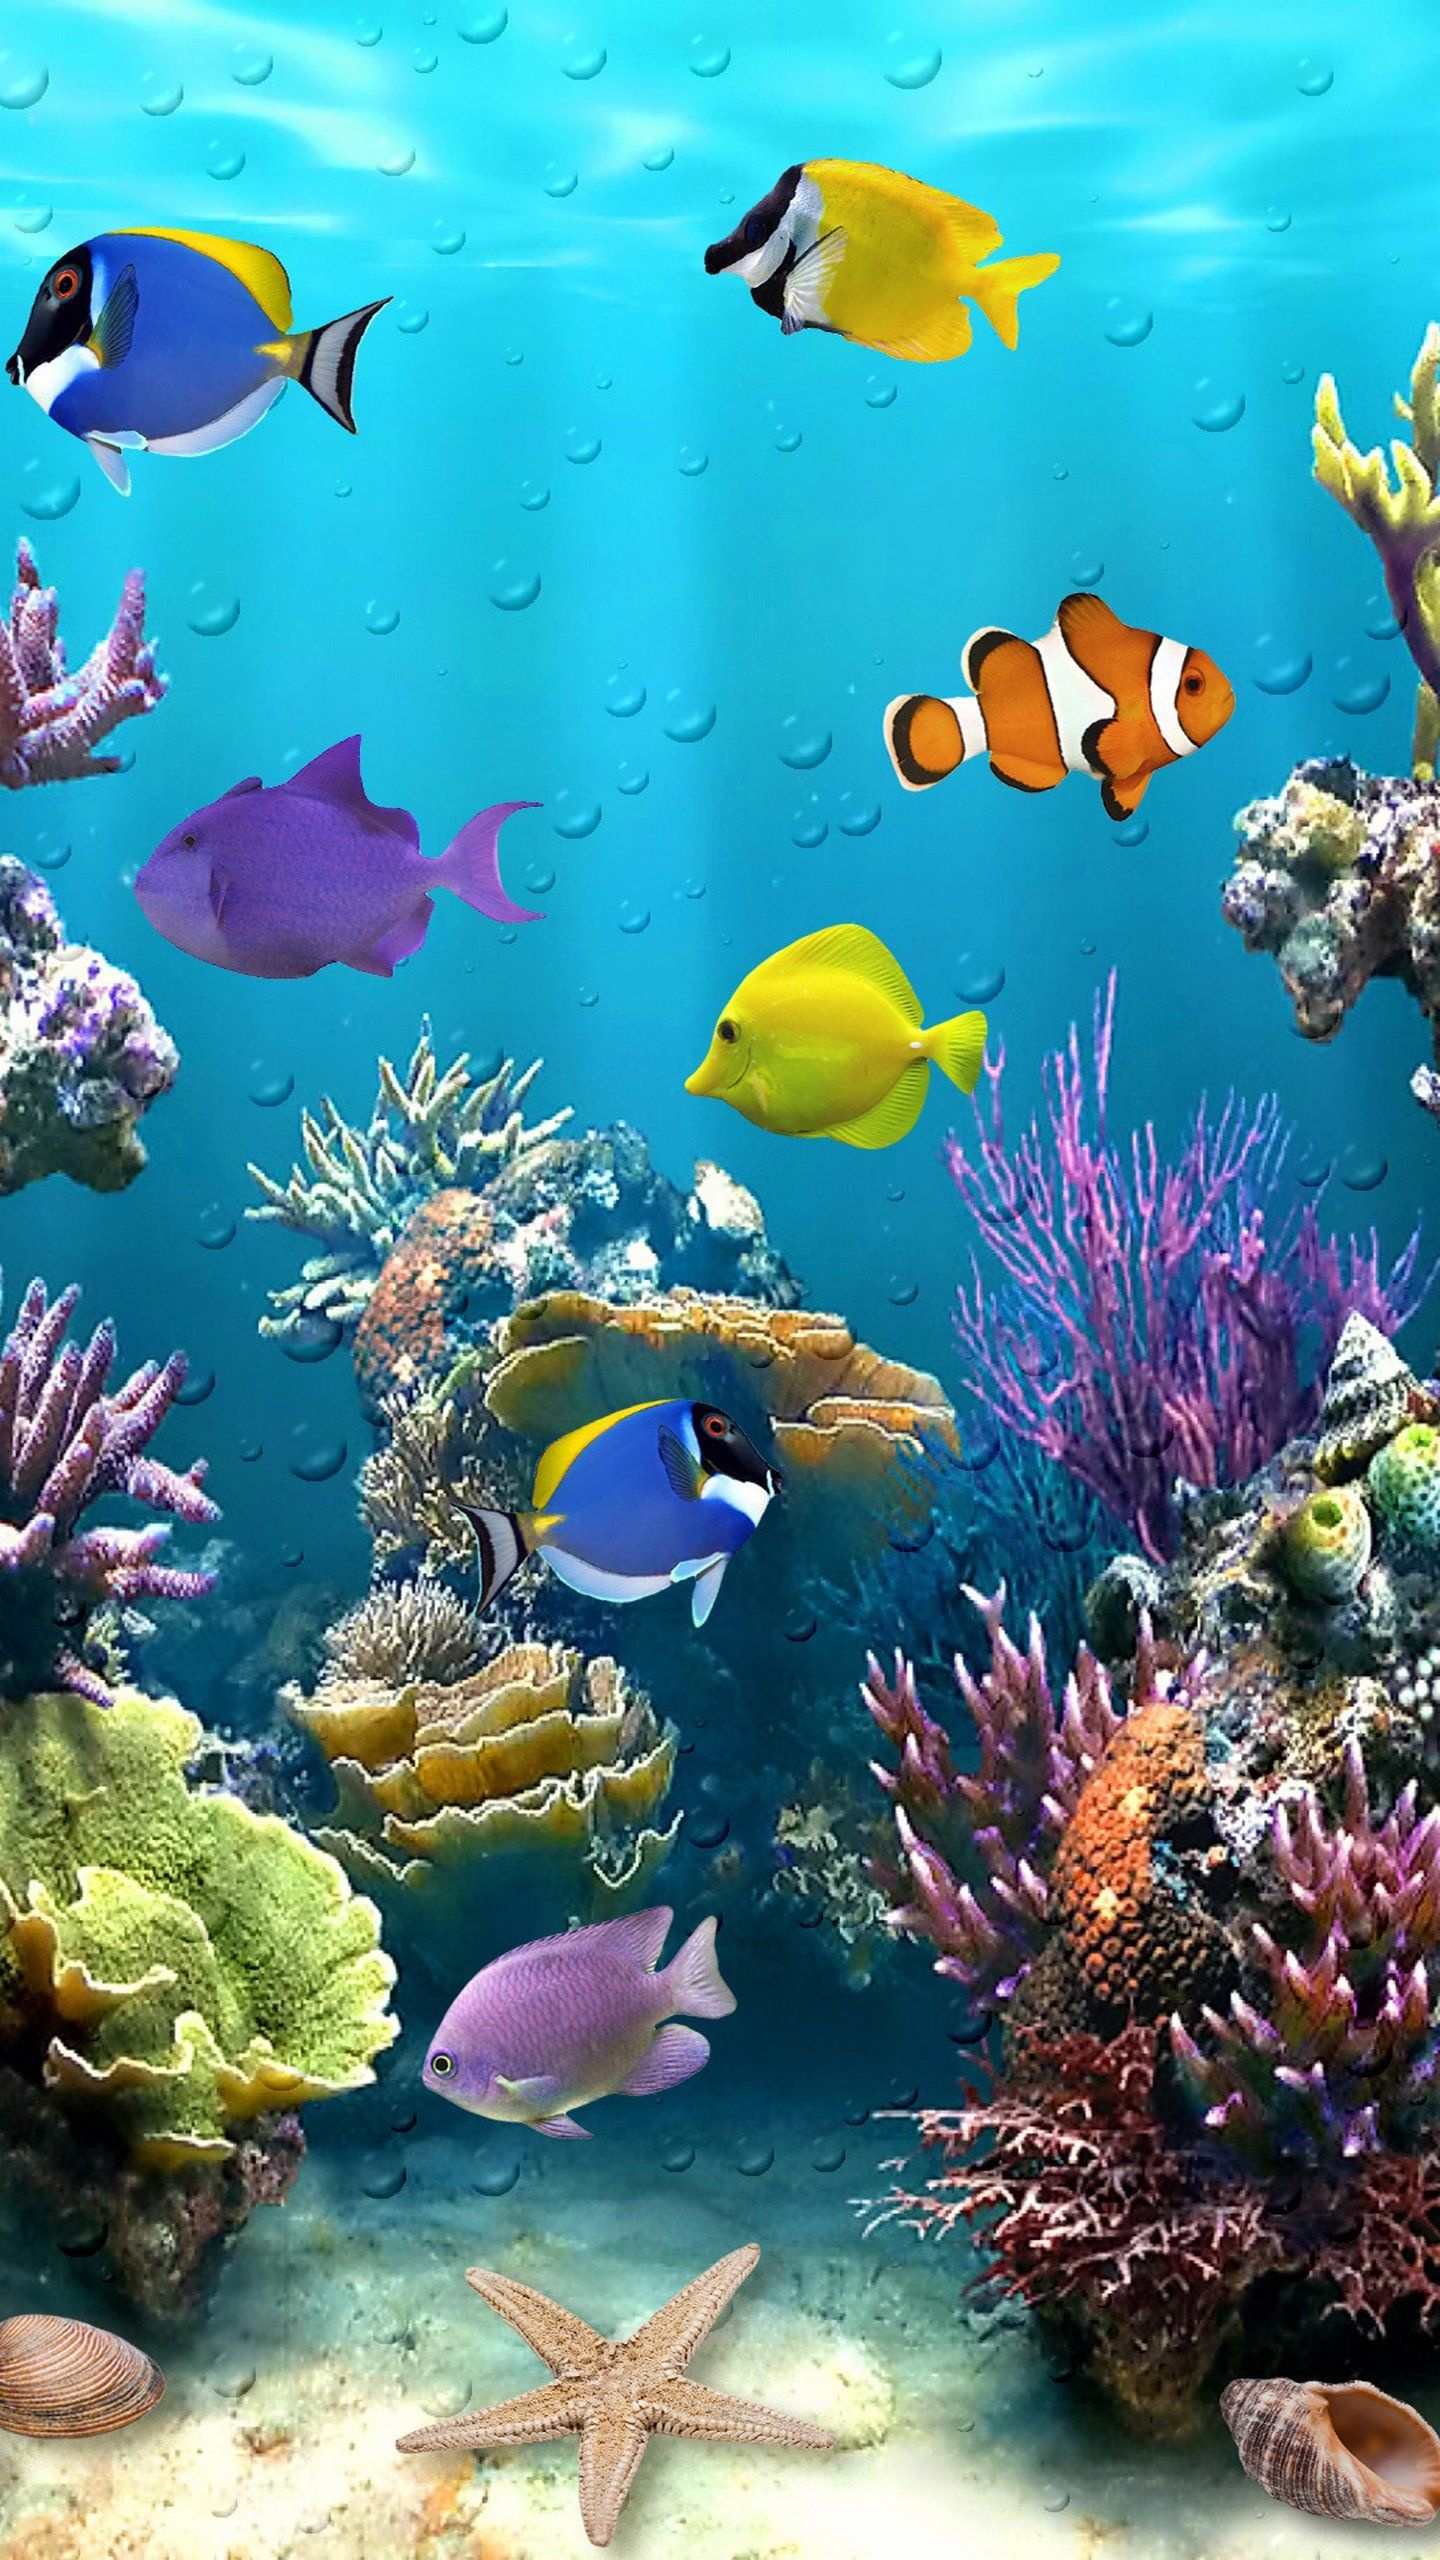 Underwater fish wallpapers, HD backgrounds, Marine beauty, Colorful aquatic creatures, 1440x2560 HD Phone